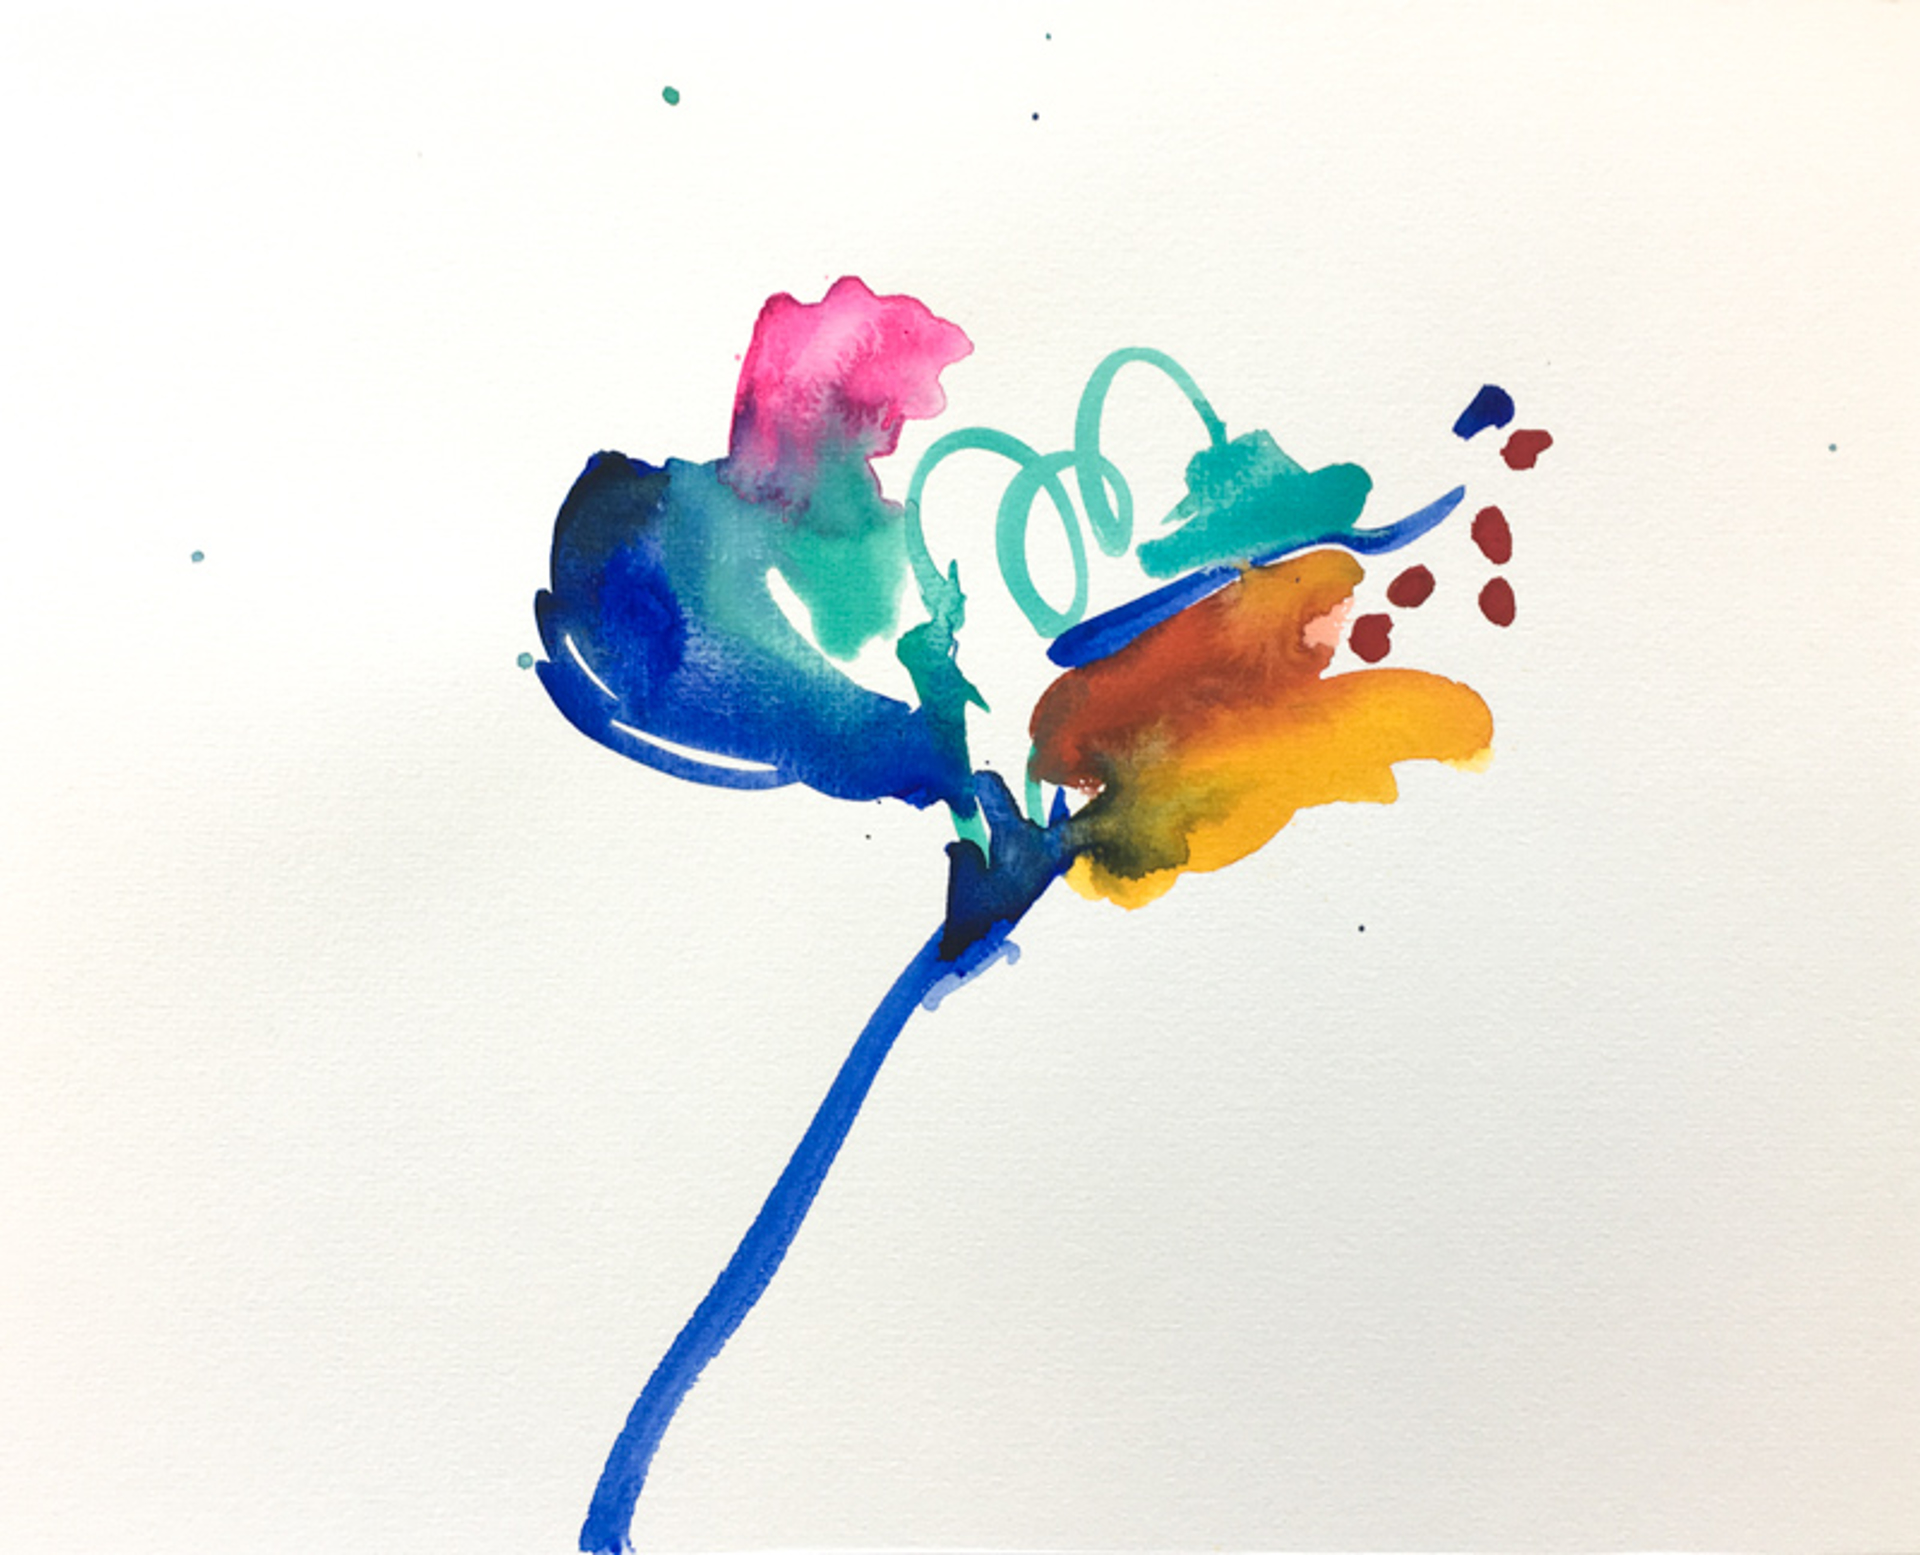 Floral Watercolor No. 7 by Christian Rothmann